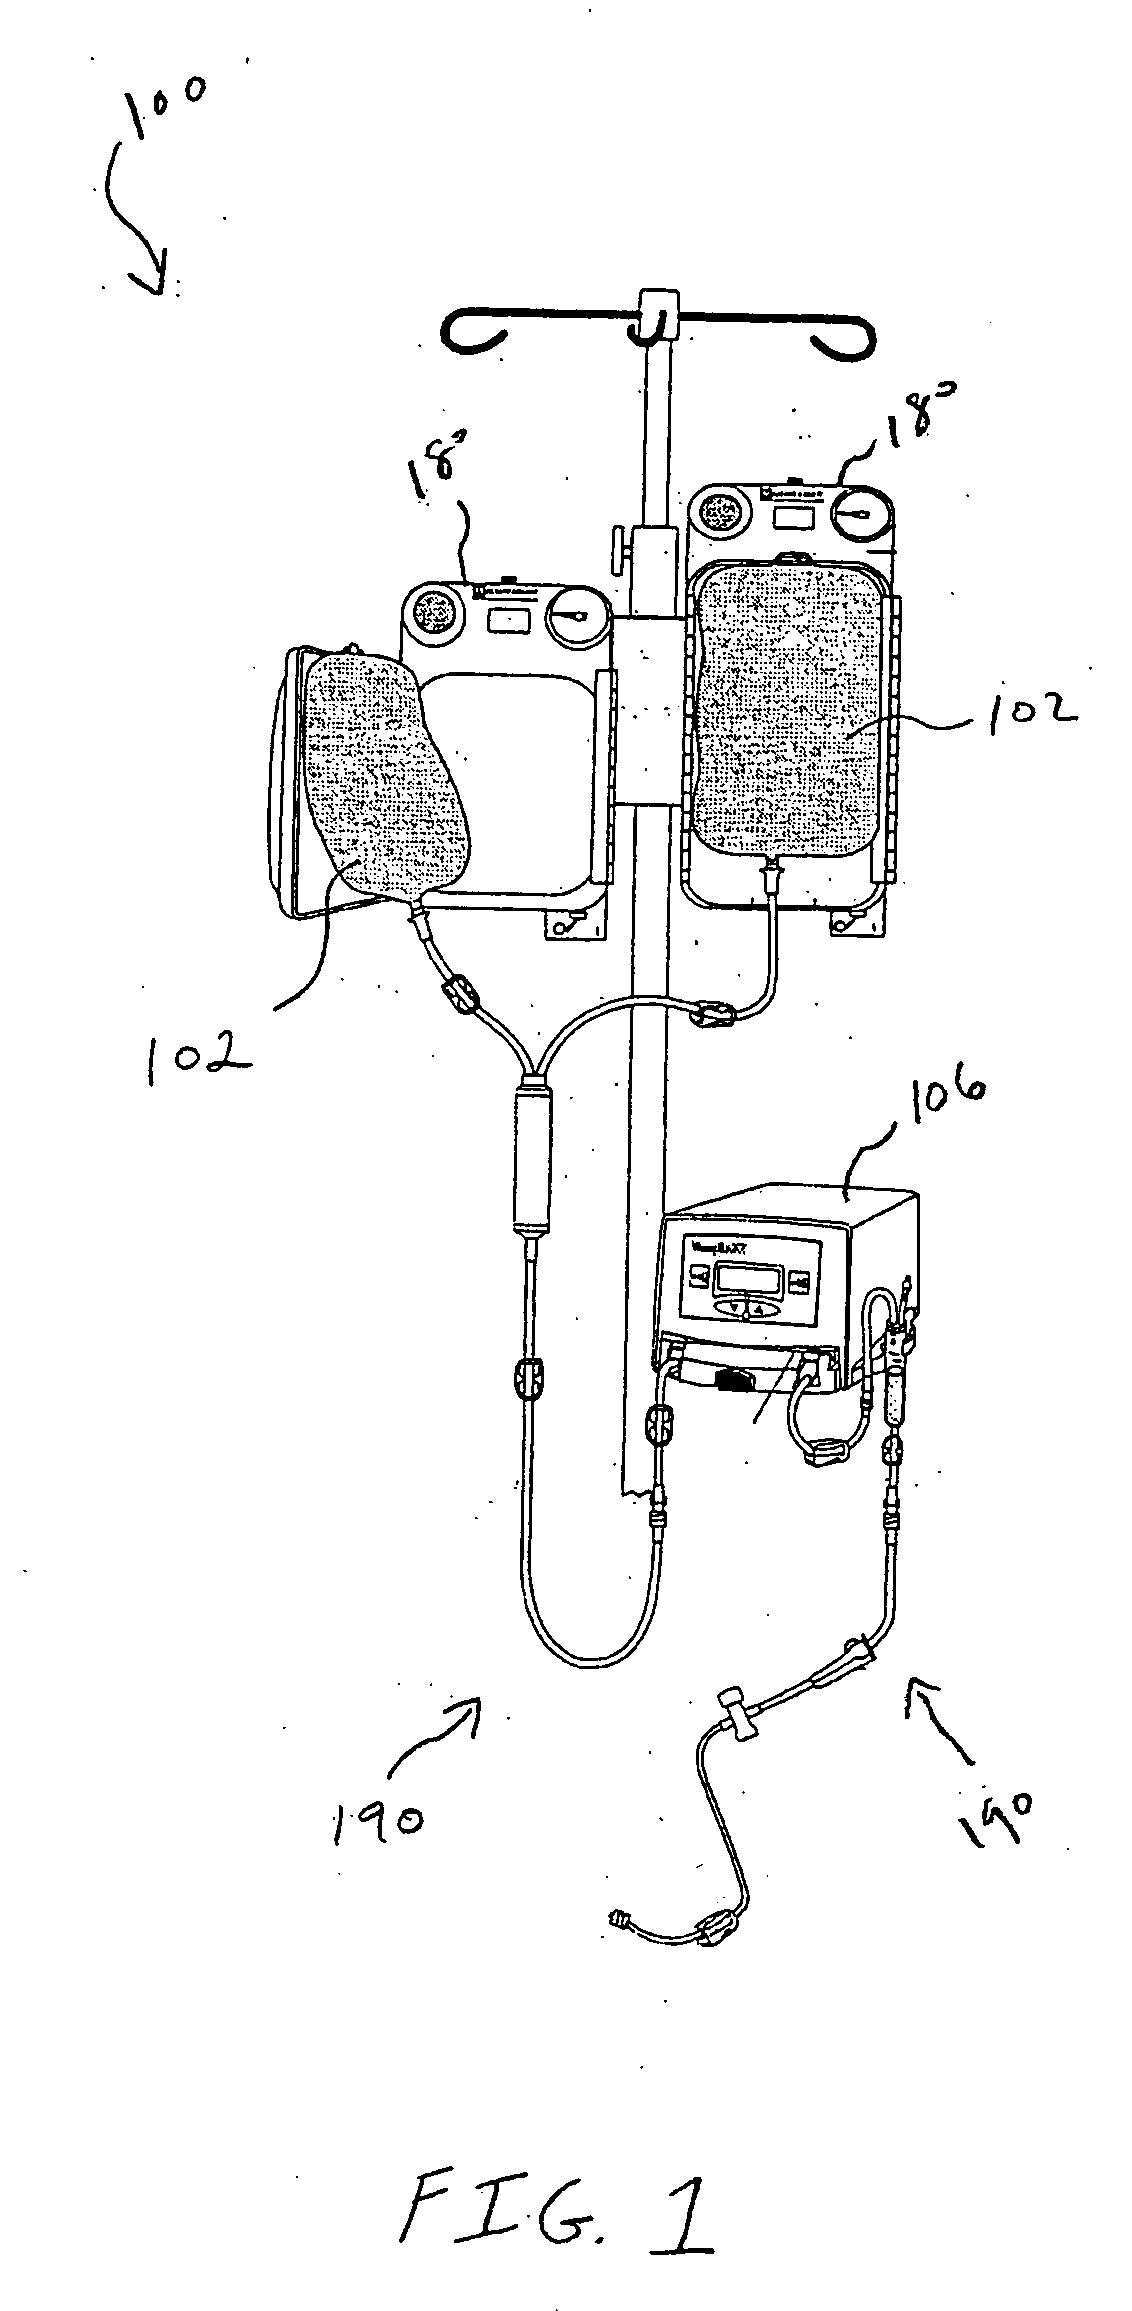 Fluid infusion apparatus with an insulated patient line tubing for preventing heat loss